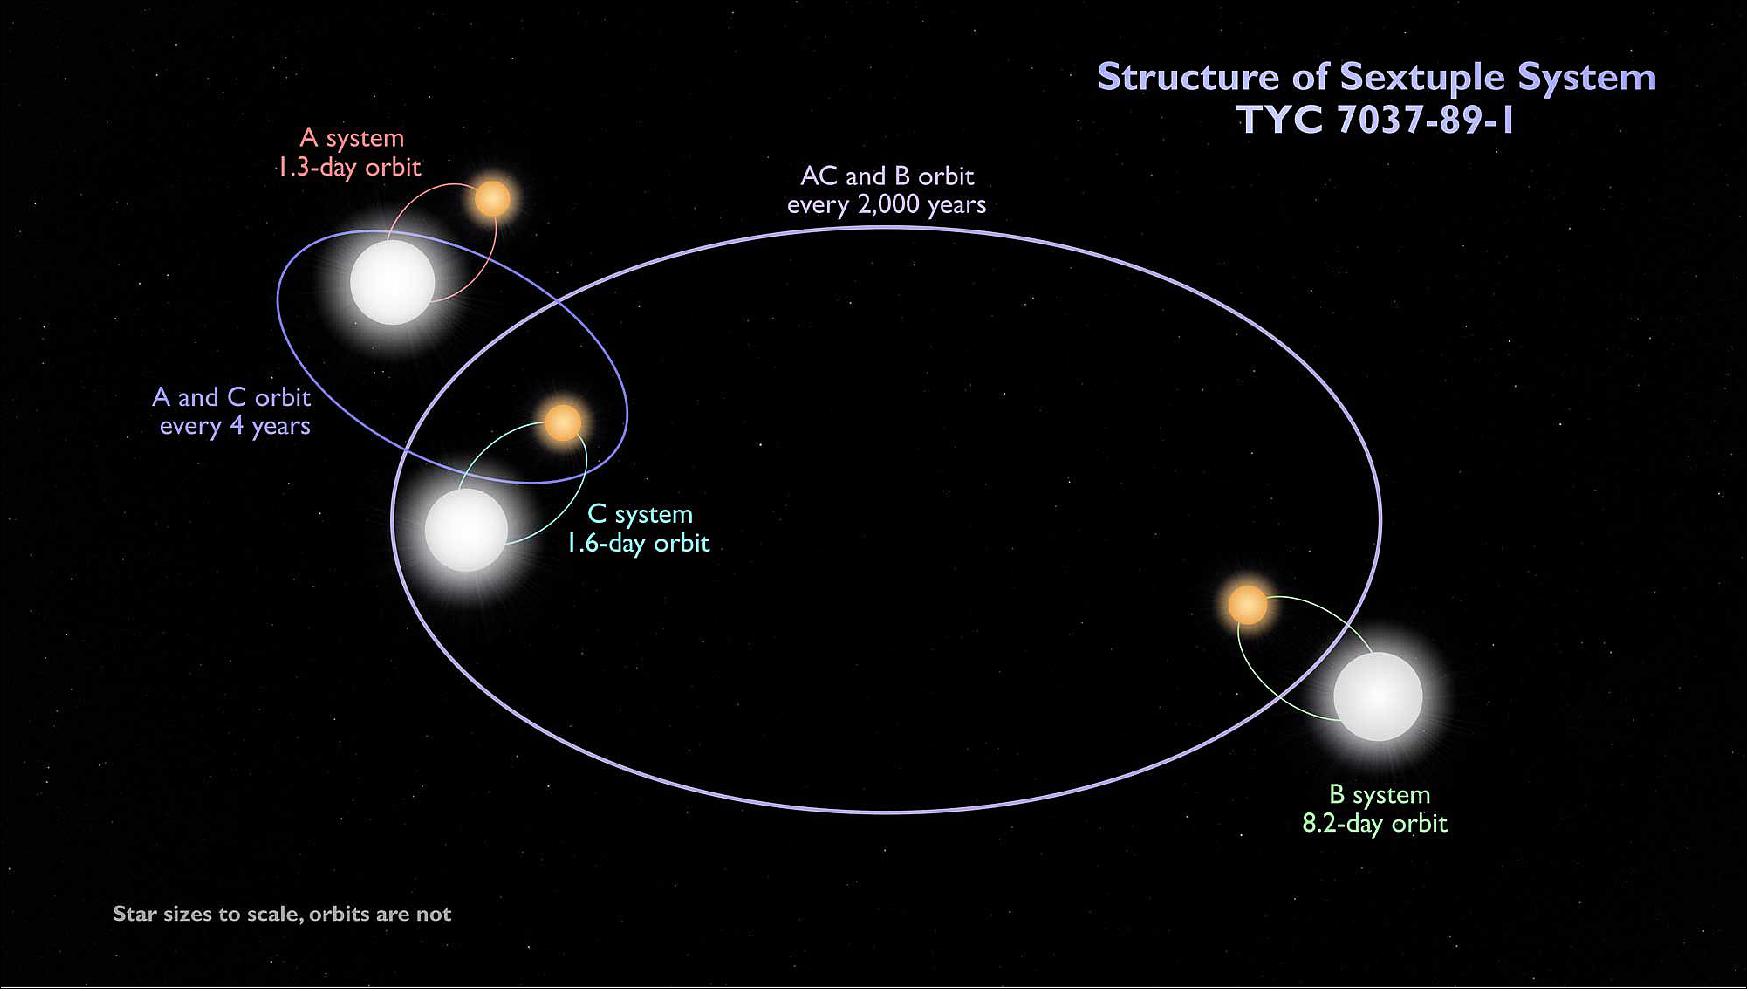 Figure 28: This schematic shows the configuration of the sextuple star system TYC 7037-89-1. The inner quadruple is composed of two binaries, A and C, which orbit each other every four years or so. An outer binary, B, orbits the quadruple roughly every 2,000 years. All three pairs are eclipsing binaries. The orbits shown are not to scale (image credit: NASA's Goddard Space Flight Center)